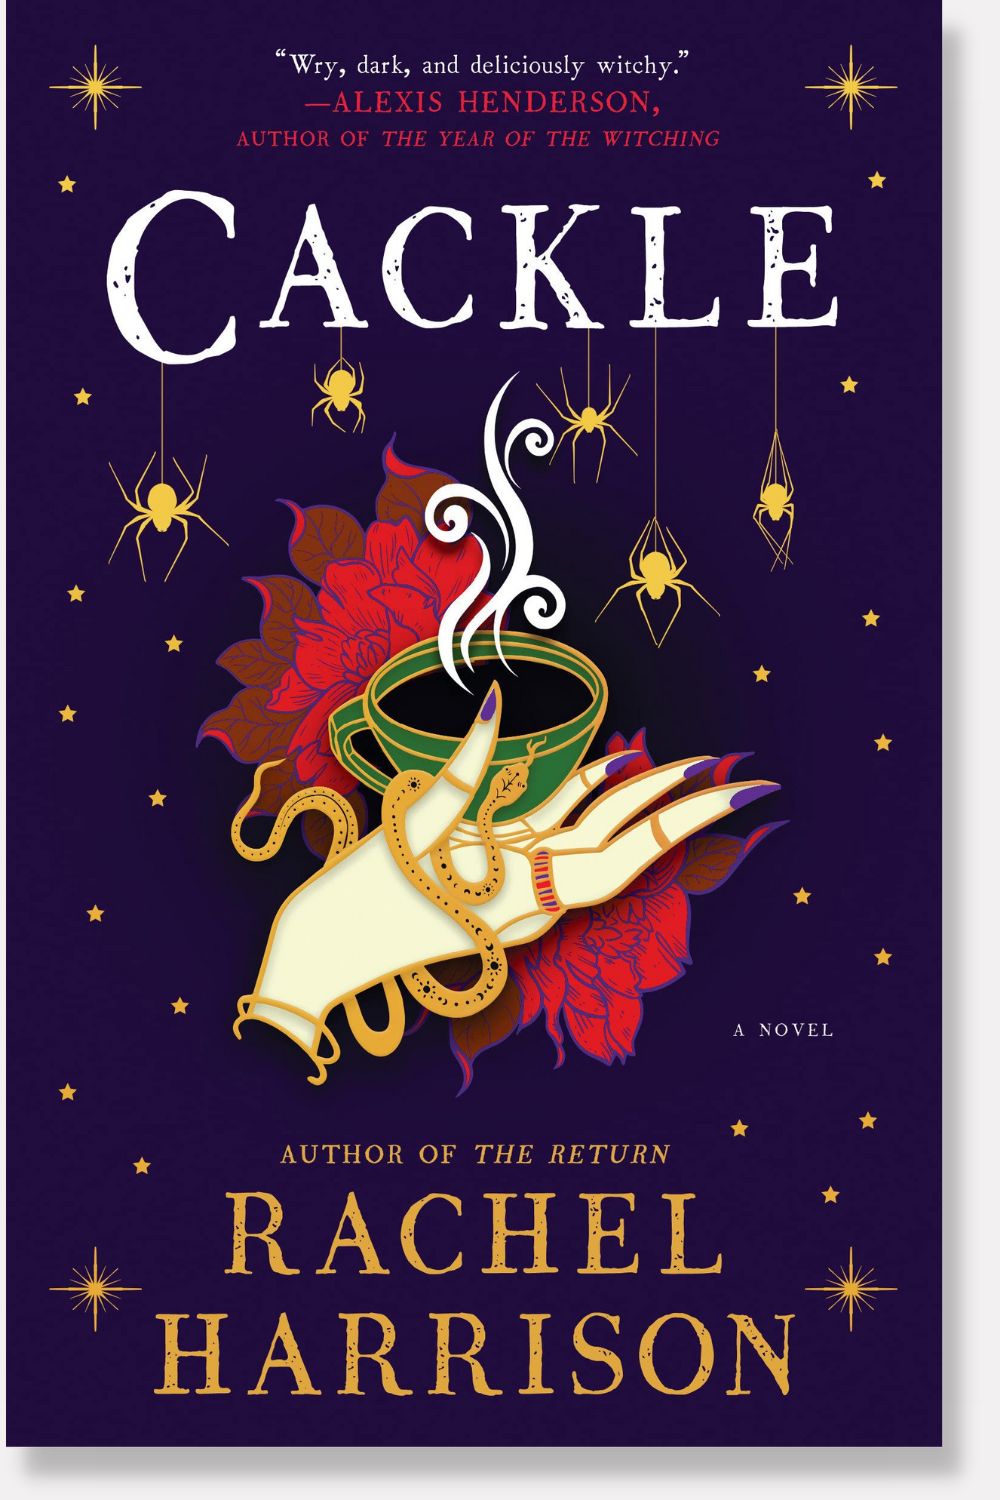 Cackle by Rachel Harrison - book cover